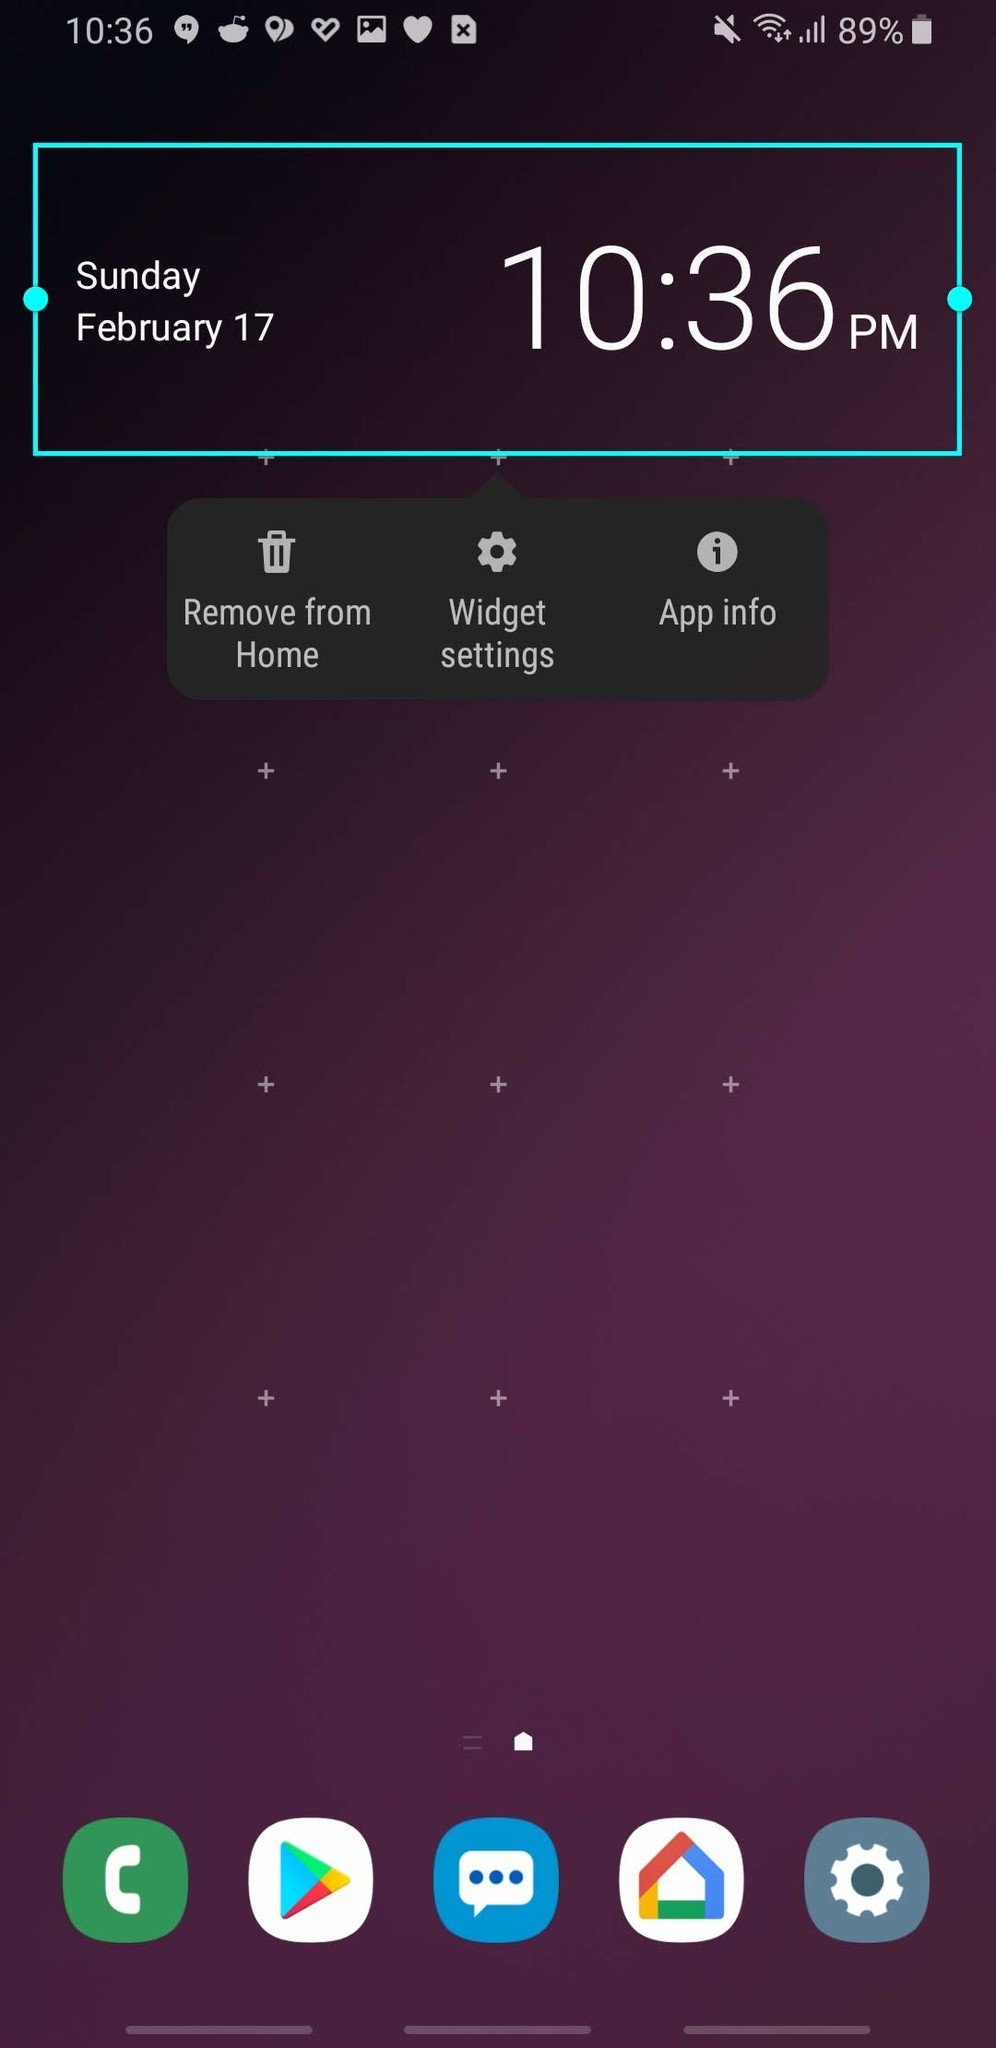 Remove from Home screen